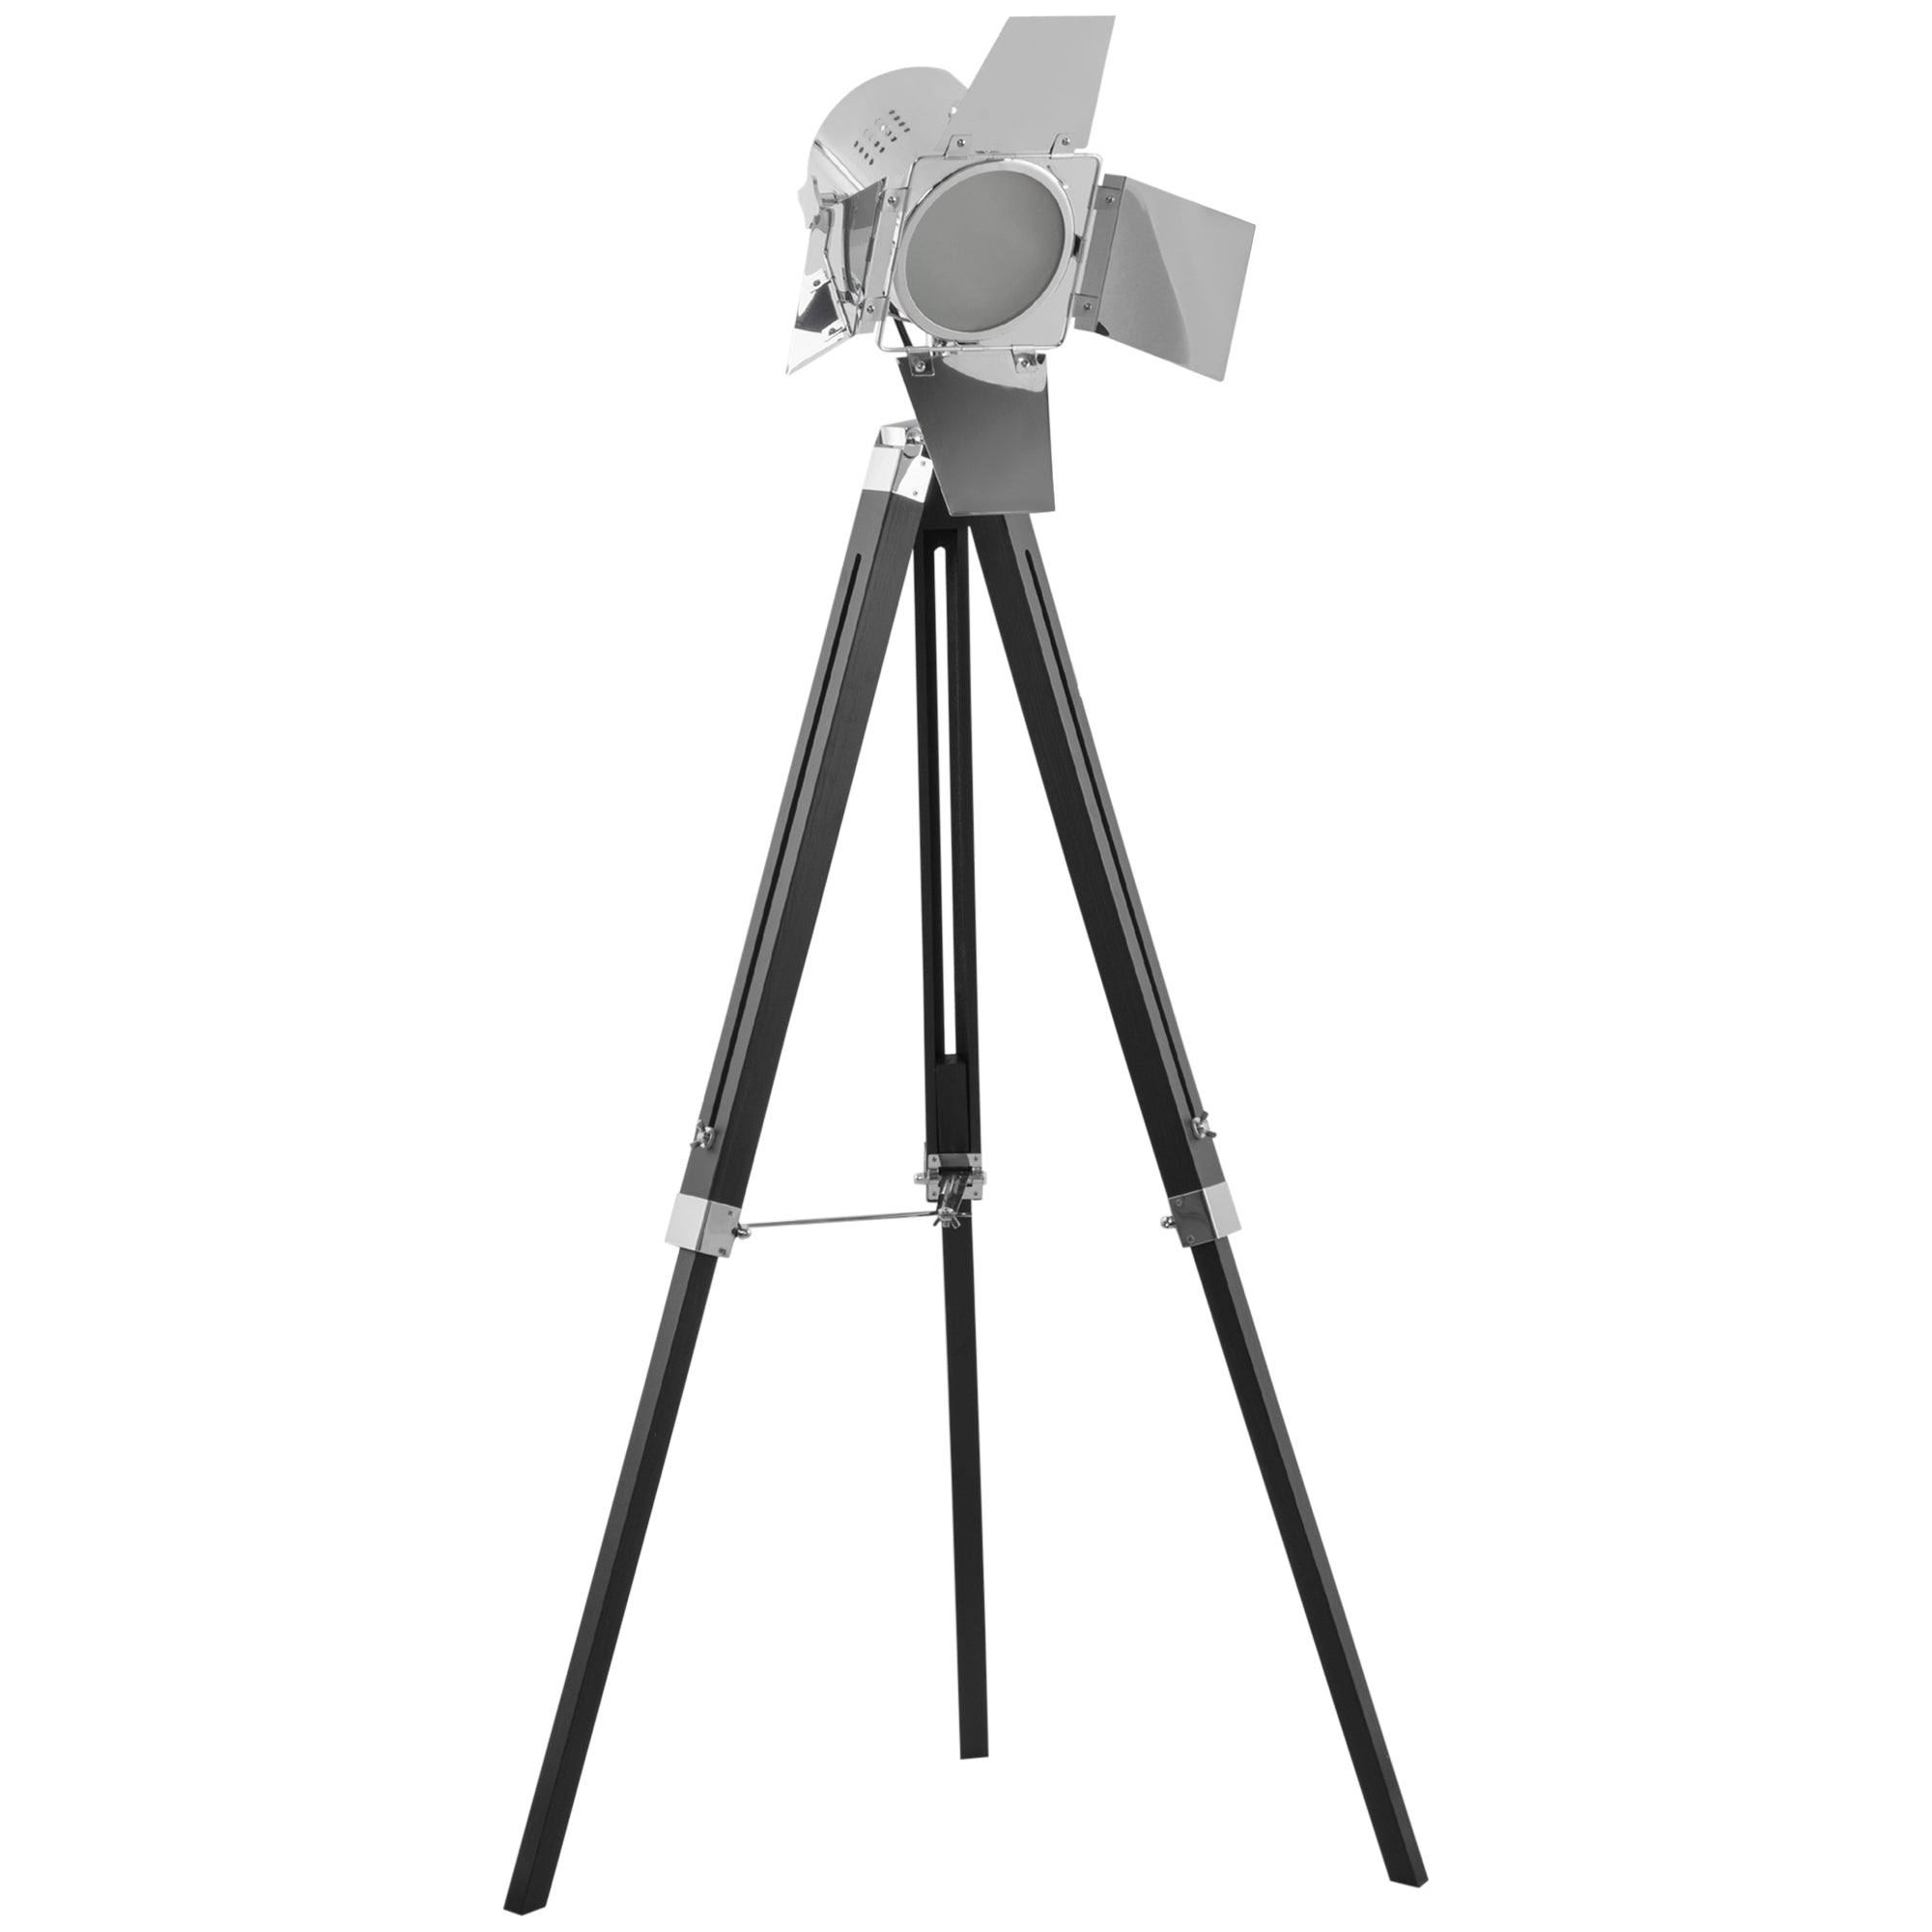 Industrial Tripod Floor Lamp, Nautical Cinema Standing Spotlight with Wood Legs and Adjustable Height for Living, Bedroom, Black and Silver  AOSOM   